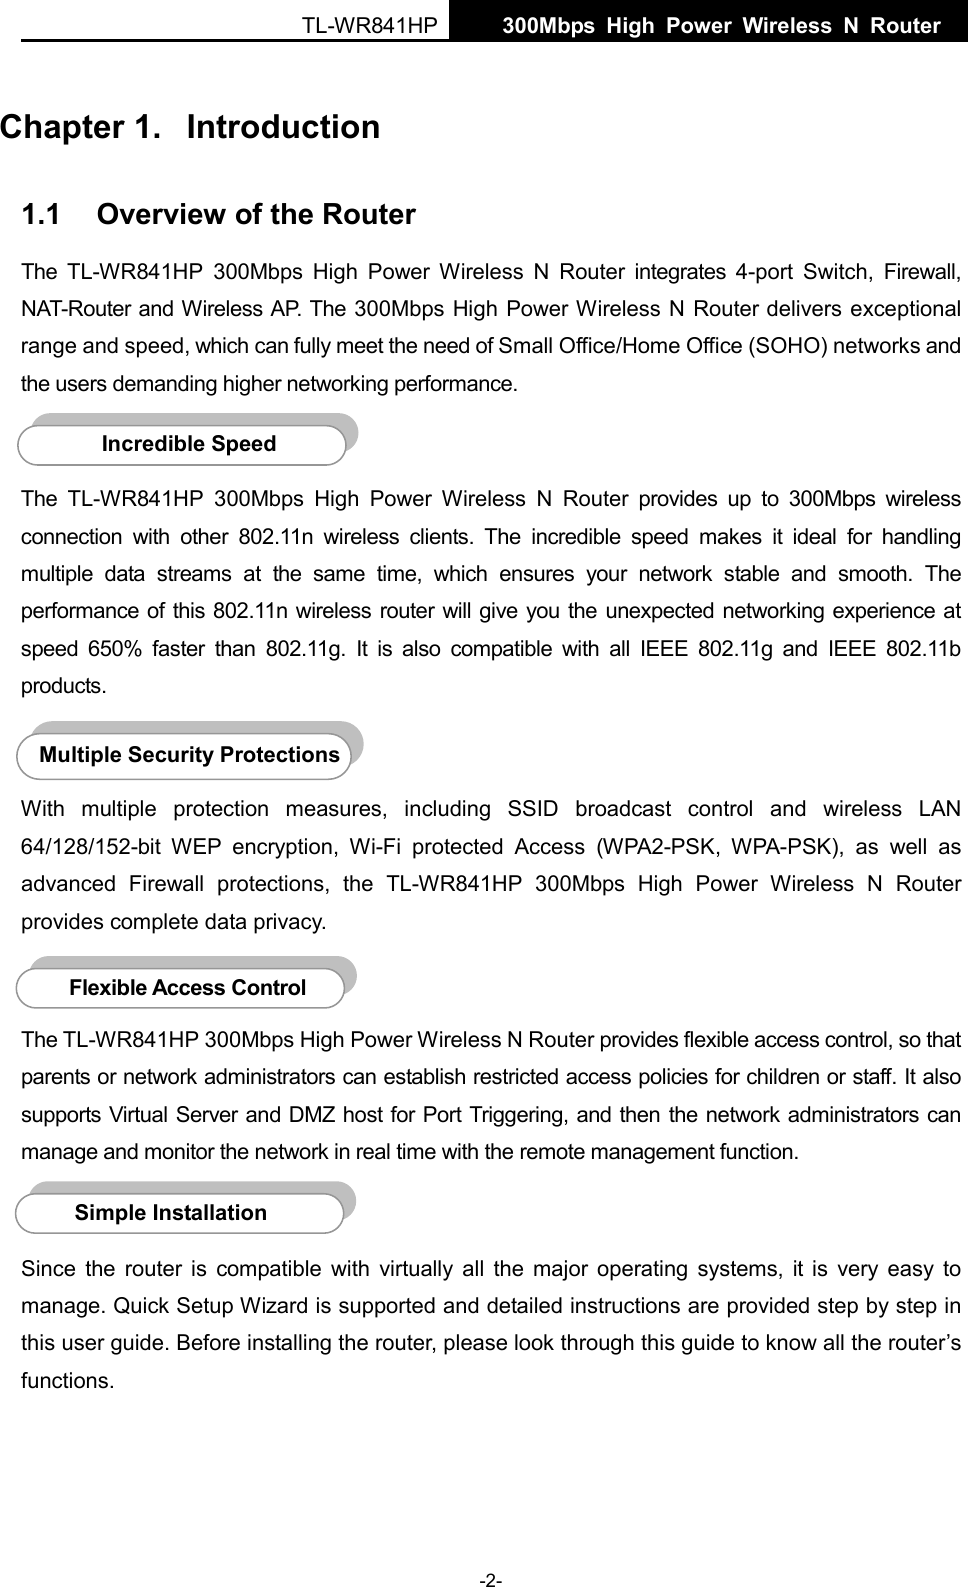  TL-WR841HP  300Mbps High Power Wireless N Router    -2- Chapter 1.  Introduction 1.1 Overview of the Router The  TL-WR841HP 300Mbps High Power Wireless N Router integrates  4-port Switch, Firewall, NAT-Router and Wireless AP. The 300Mbps High Power Wireless N Router delivers exceptional range and speed, which can fully meet the need of Small Office/Home Office (SOHO) networks and the users demanding higher networking performance.  The TL-WR841HP 300Mbps High Power Wireless N Router provides up to 300Mbps wireless connection with other 802.11n wireless clients. The incredible speed makes  it ideal for handling multiple data streams at the same time, which ensures your network stable and smooth.  The performance of this 802.11n wireless router will give you the unexpected networking experience at speed 650% faster than 802.11g. It is also  compatible with all IEEE 802.11g and IEEE 802.11b products.  With multiple protection measures, including SSID broadcast control and wireless LAN 64/128/152-bit WEP encryption,  Wi-Fi protected Access (WPA2-PSK, WPA-PSK), as well as advanced Firewall protections, the TL-WR841HP 300Mbps High Power Wireless N Router provides complete data privacy.     The TL-WR841HP 300Mbps High Power Wireless N Router provides flexible access control, so that parents or network administrators can establish restricted access policies for children or staff. It also supports Virtual Server and DMZ host for Port Triggering, and then the network administrators can manage and monitor the network in real time with the remote management function.    Since the router is compatible with virtually all the major operating systems, it  is  very  easy to manage. Quick Setup Wizard is supported and detailed instructions are provided step by step in this user guide. Before installing the router, please look through this guide to know all the router’s functions. Simple Installation Flexible Access Control  Multiple Security Protections Incredible Speed  